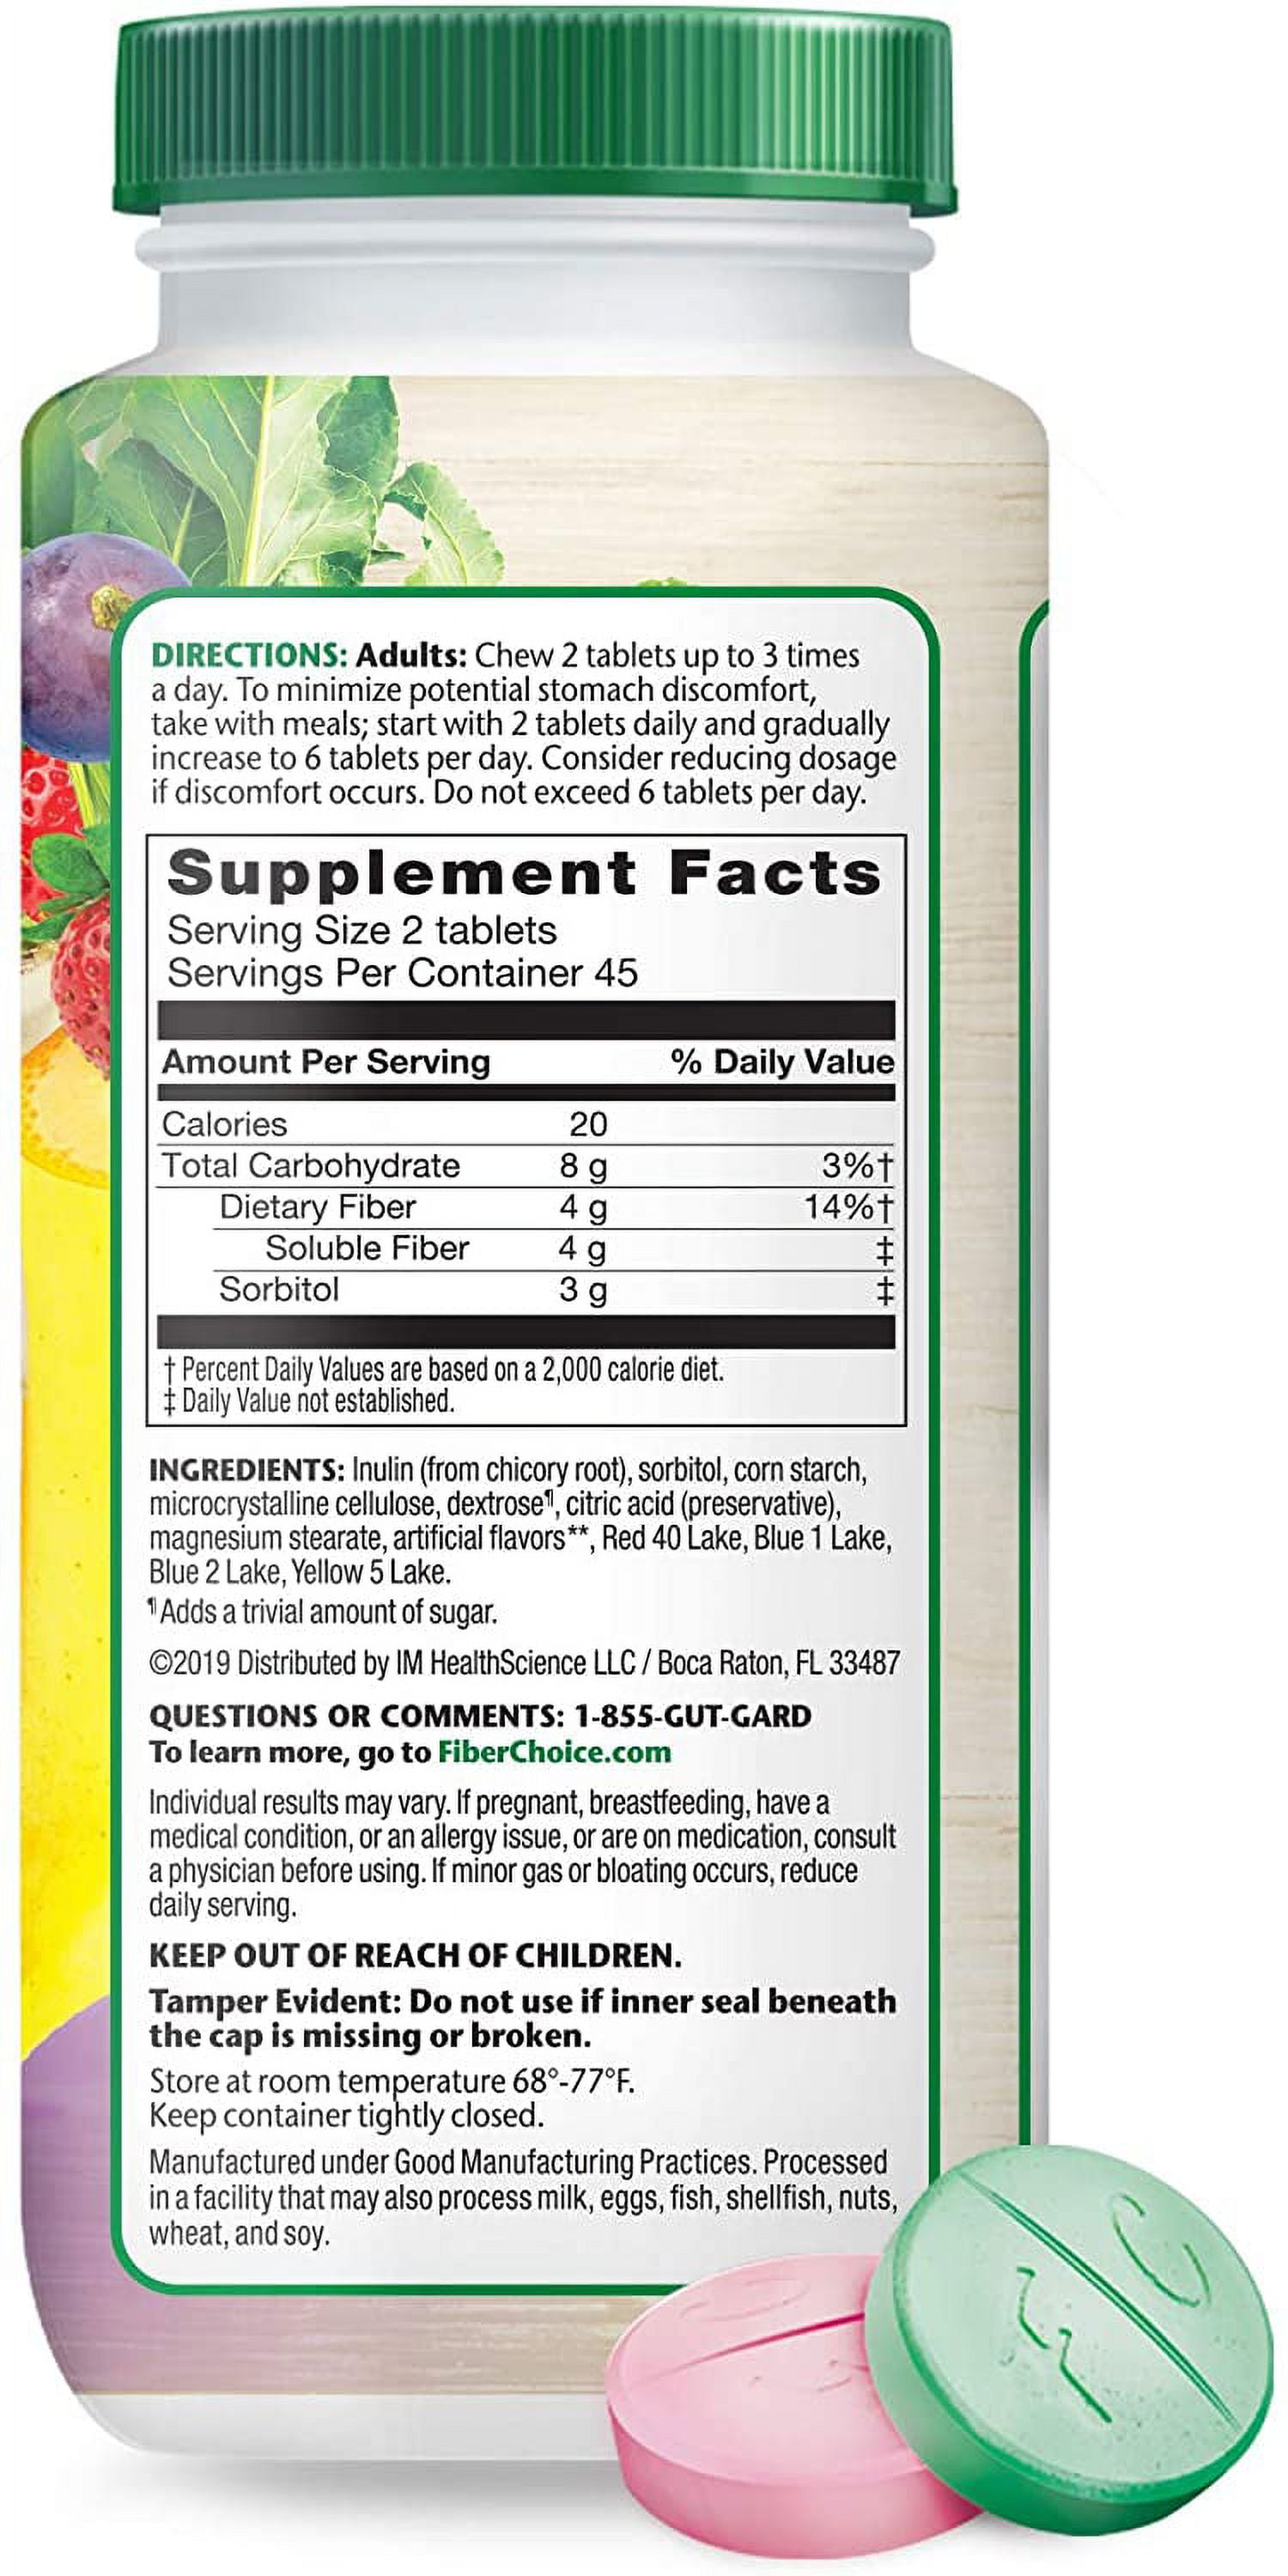 Fiber Choice Daily Prebiotic Fiber Chewable Tablets, Assorted Fruit, 90  Tablets 